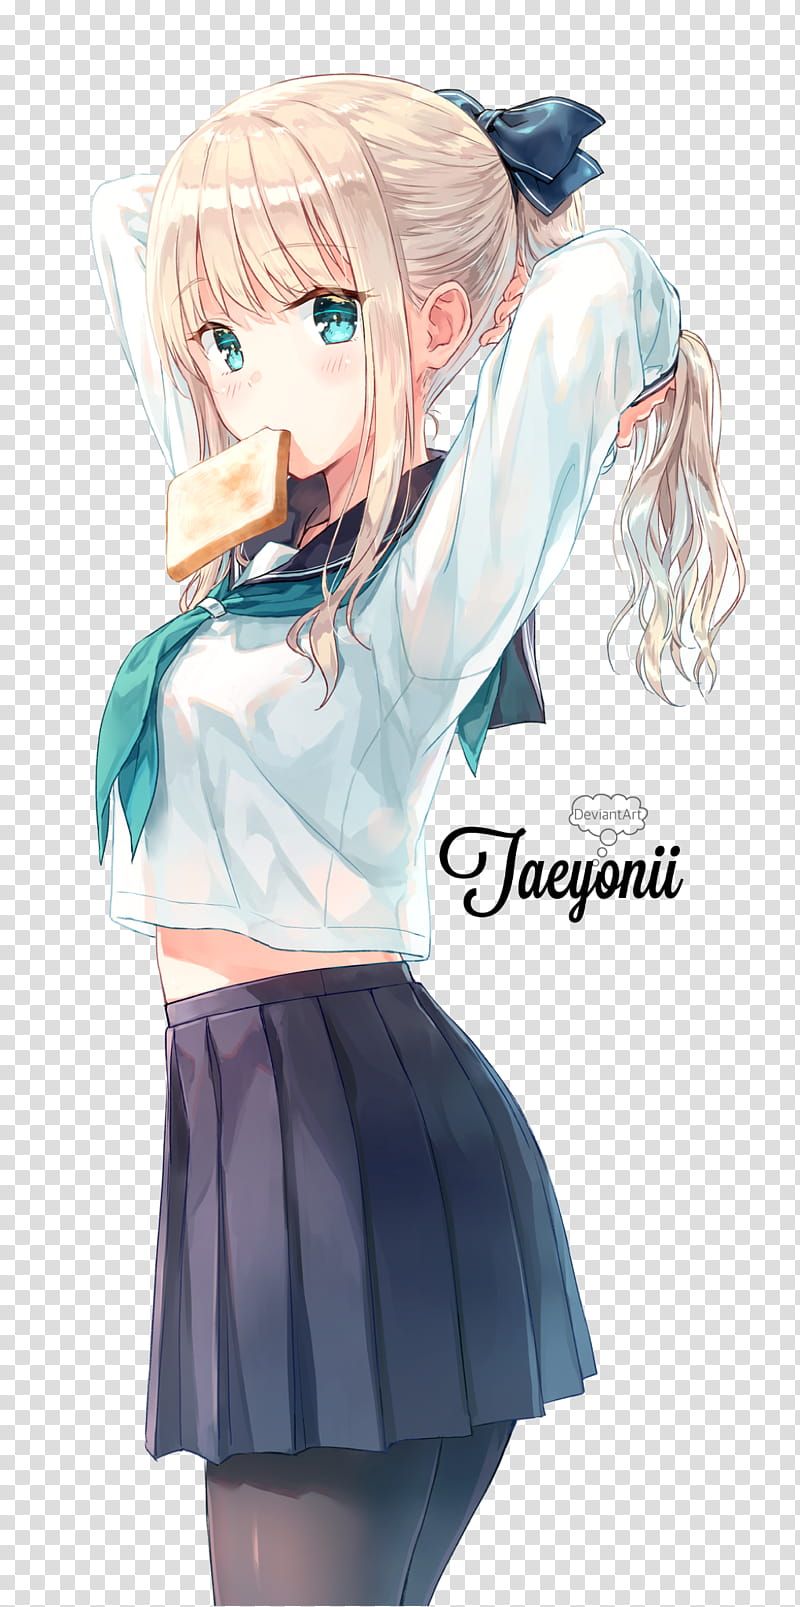 Anime School Girl, Jaeyonii anime character transparent background